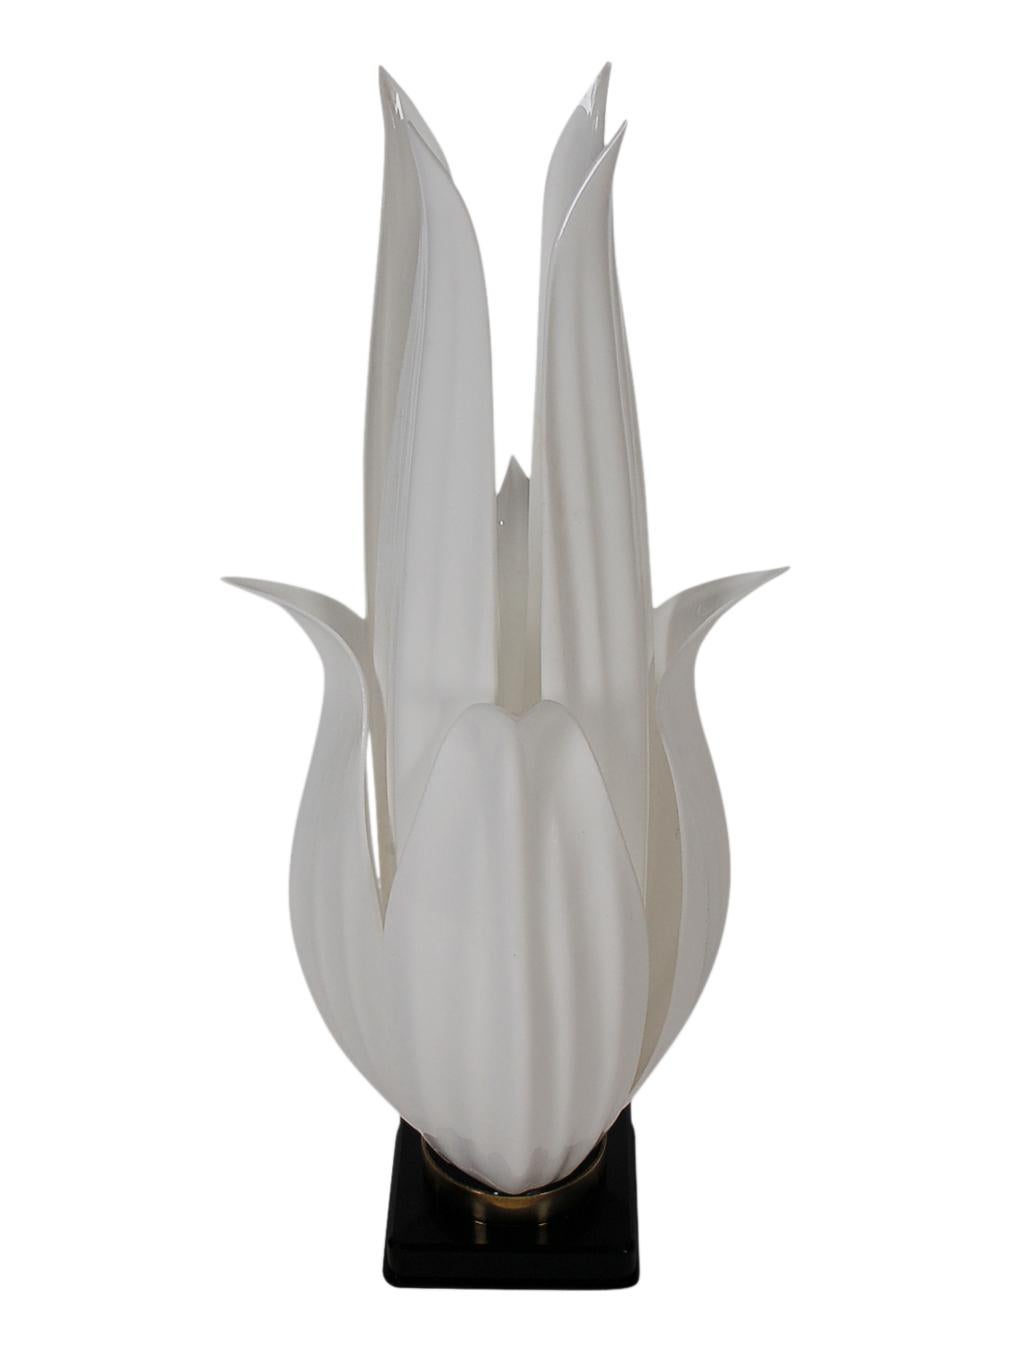 Late 20th Century Mid-Century Modern Black and White Flower Form Acrylic Table Lamp by Rougier For Sale